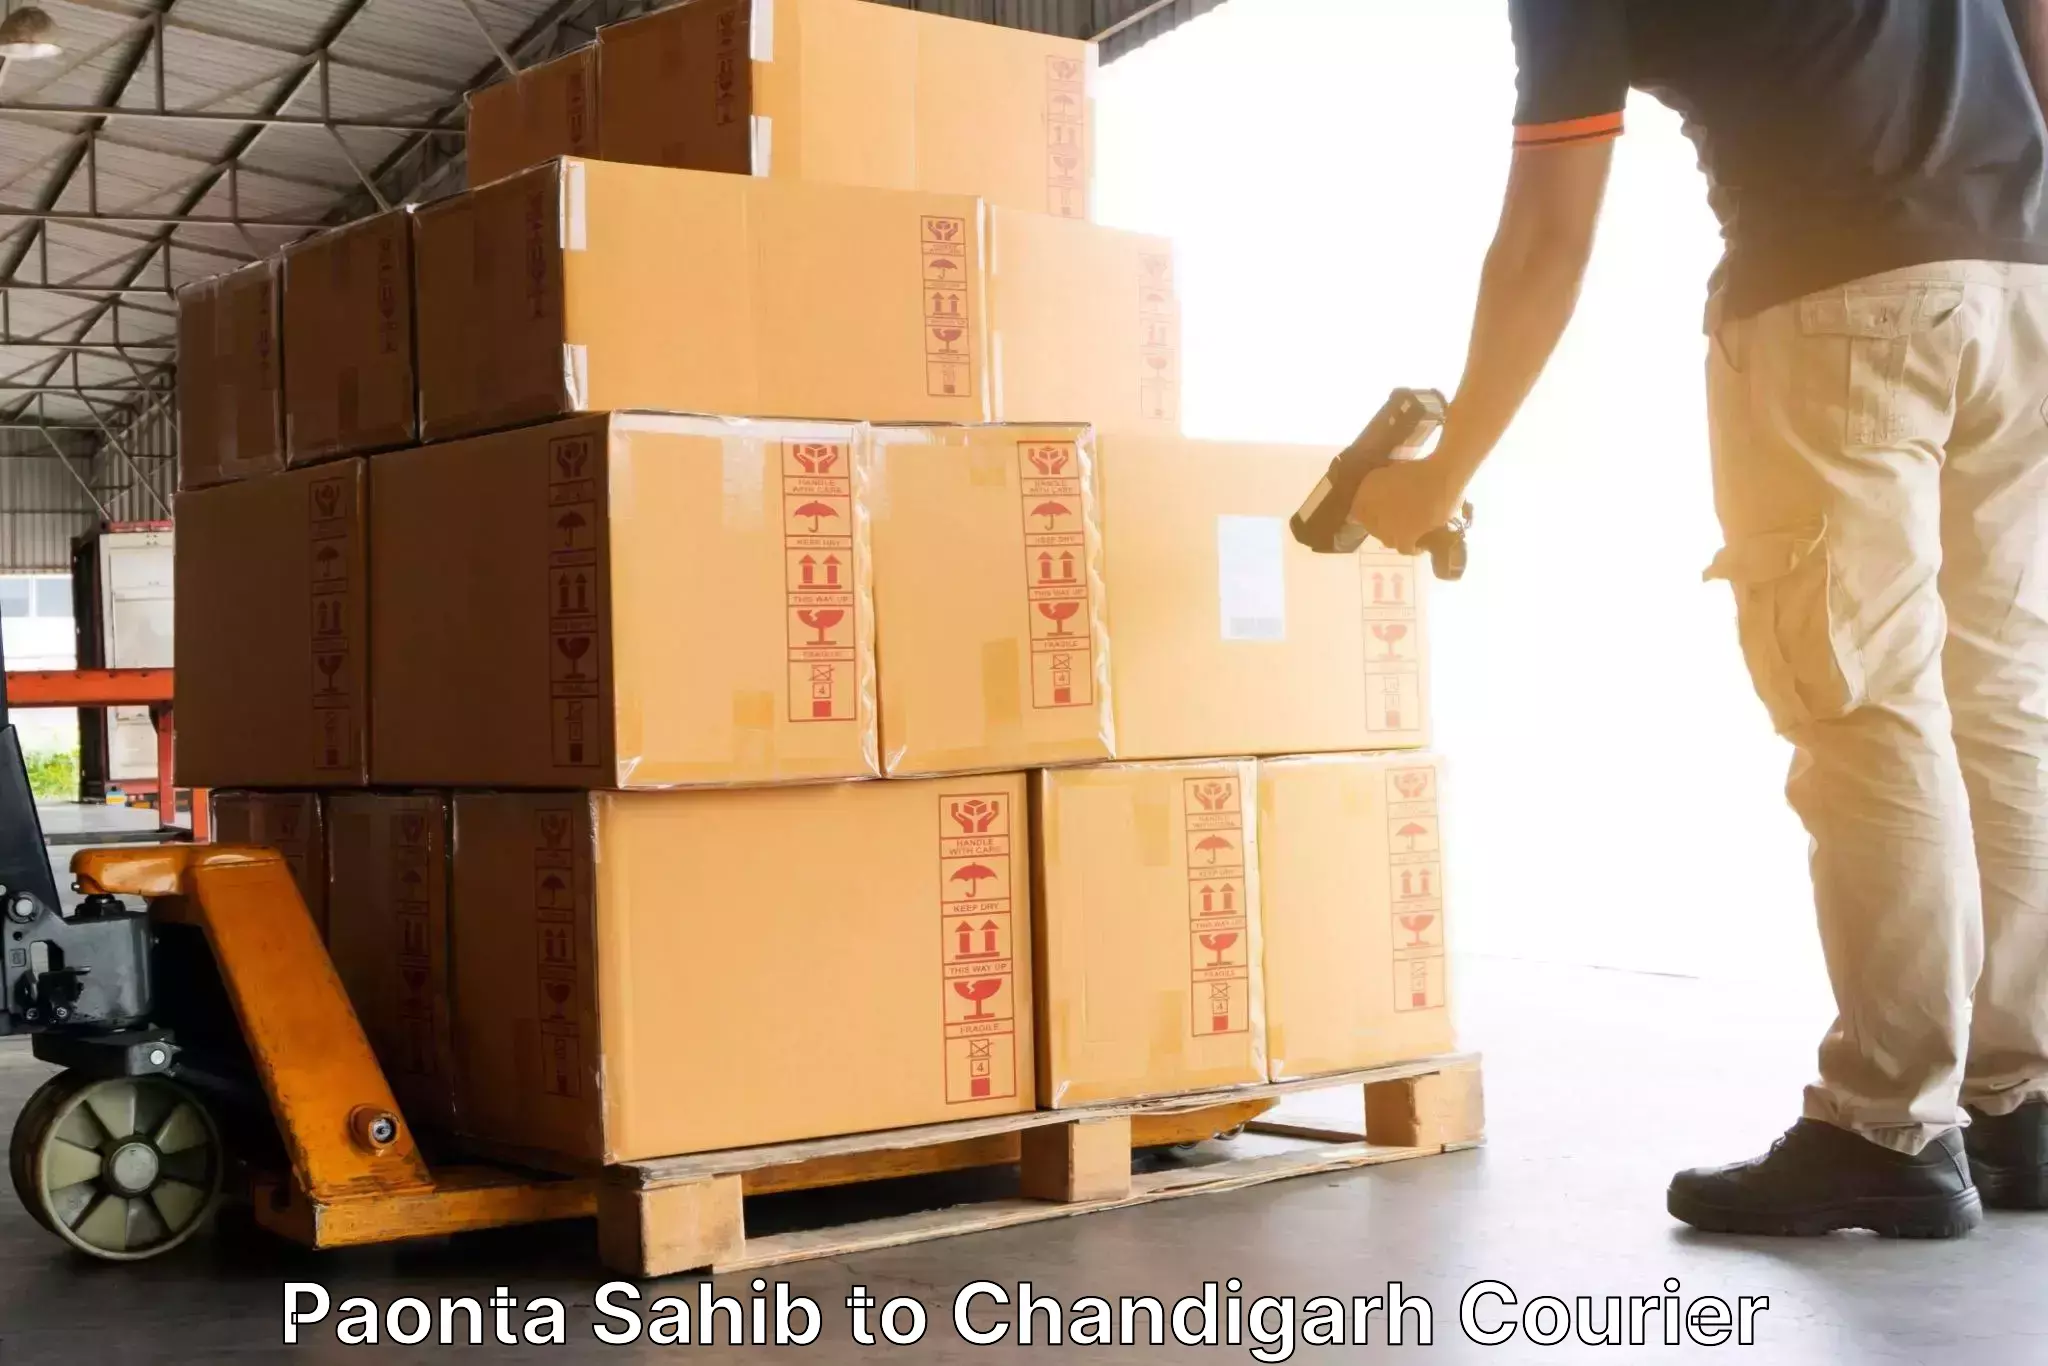 Same-day delivery solutions Paonta Sahib to Chandigarh